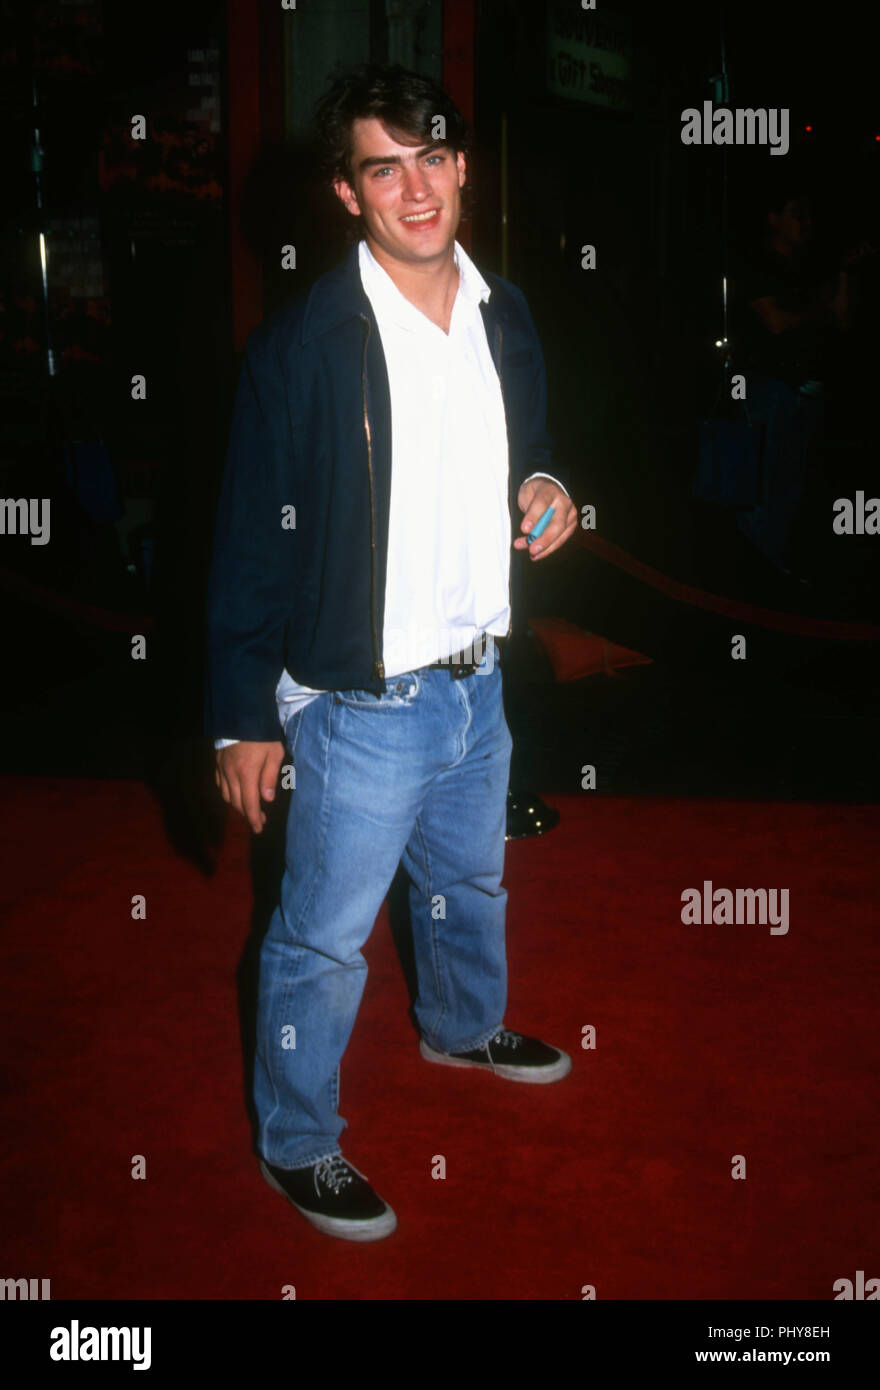 HOLLYWOOD, CA - SEPTEMBER 8: Actor Rodney Harvey attends the premiere of New Line Cinema's 'Where The Day Takes You' on September 8, 1992 at Mann's Chinese Theatre in Hollywood, California. Photo by Barry King/Alamy Stock Photo Stock Photo